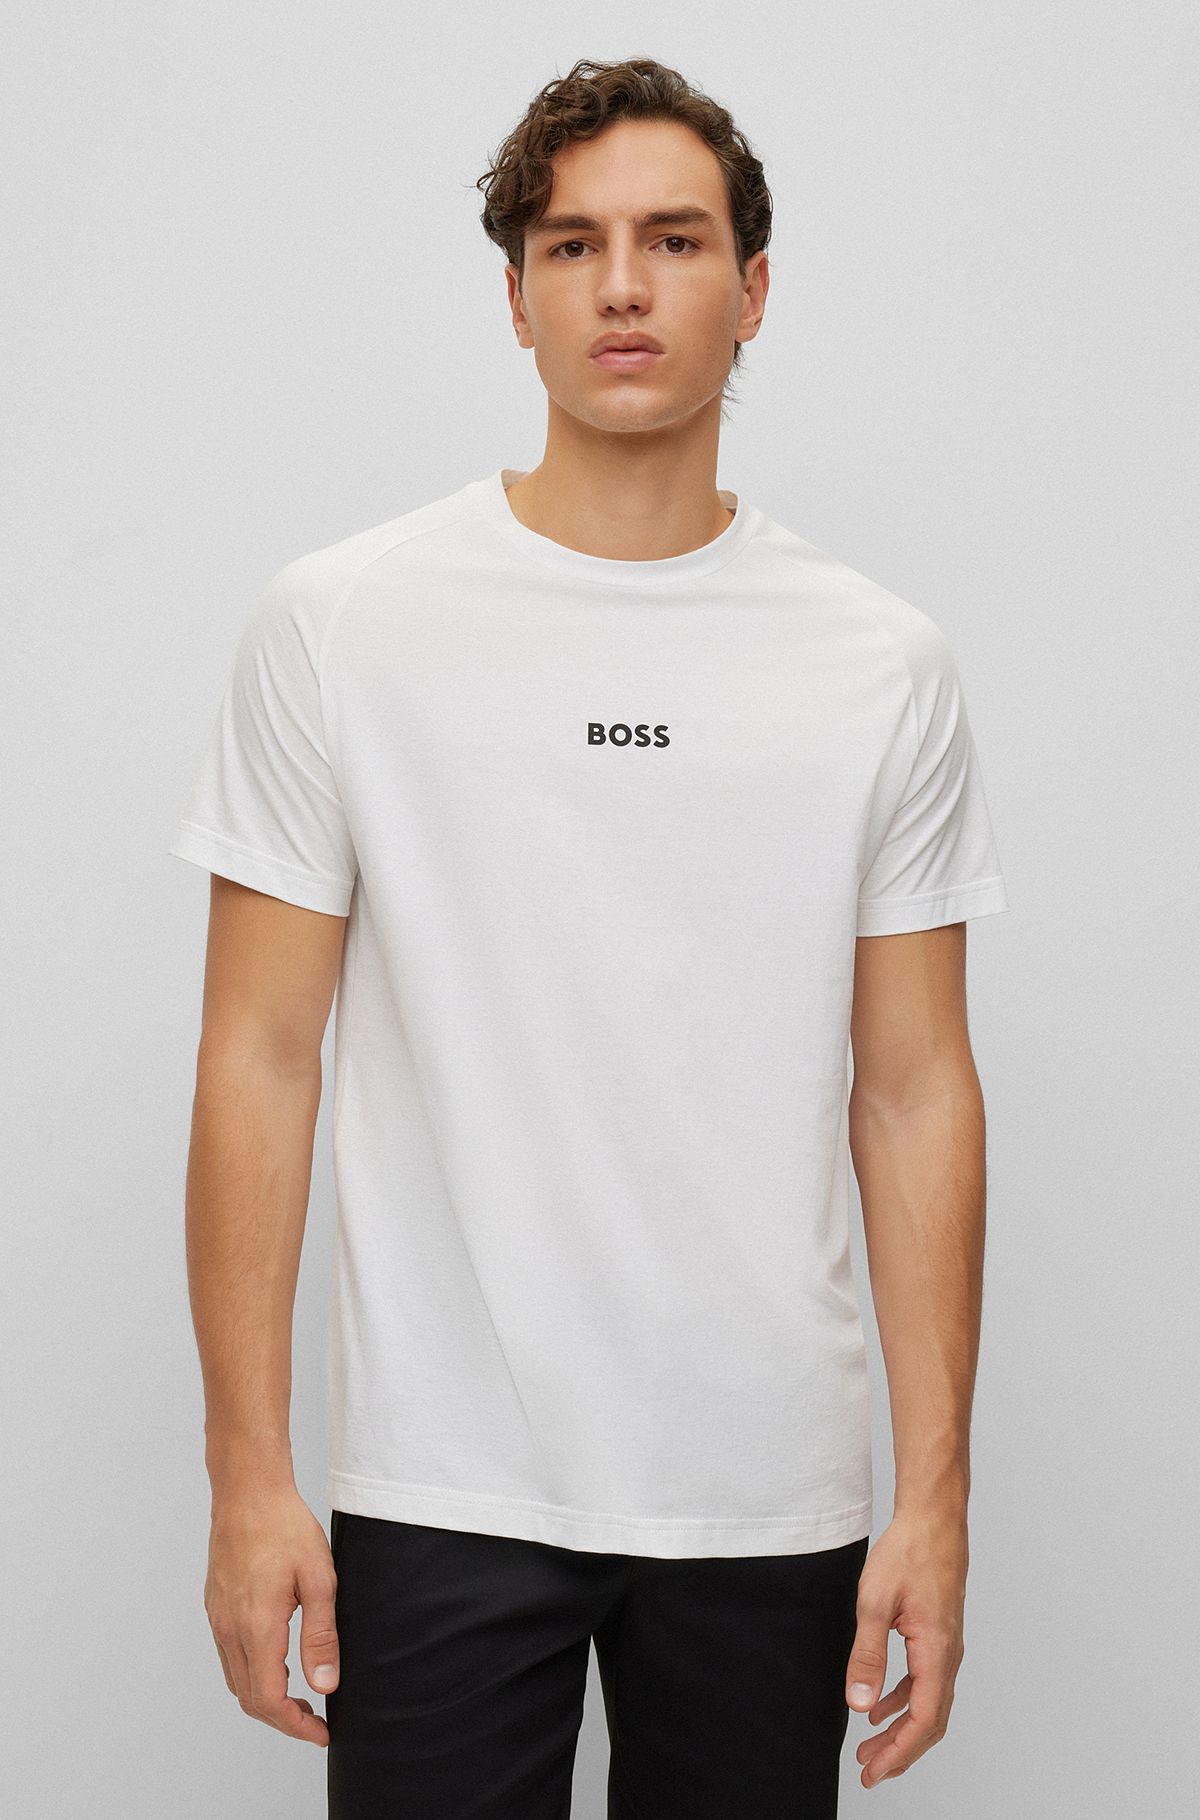 with stripe - T-shirt Stretch-cotton logo BOSS and